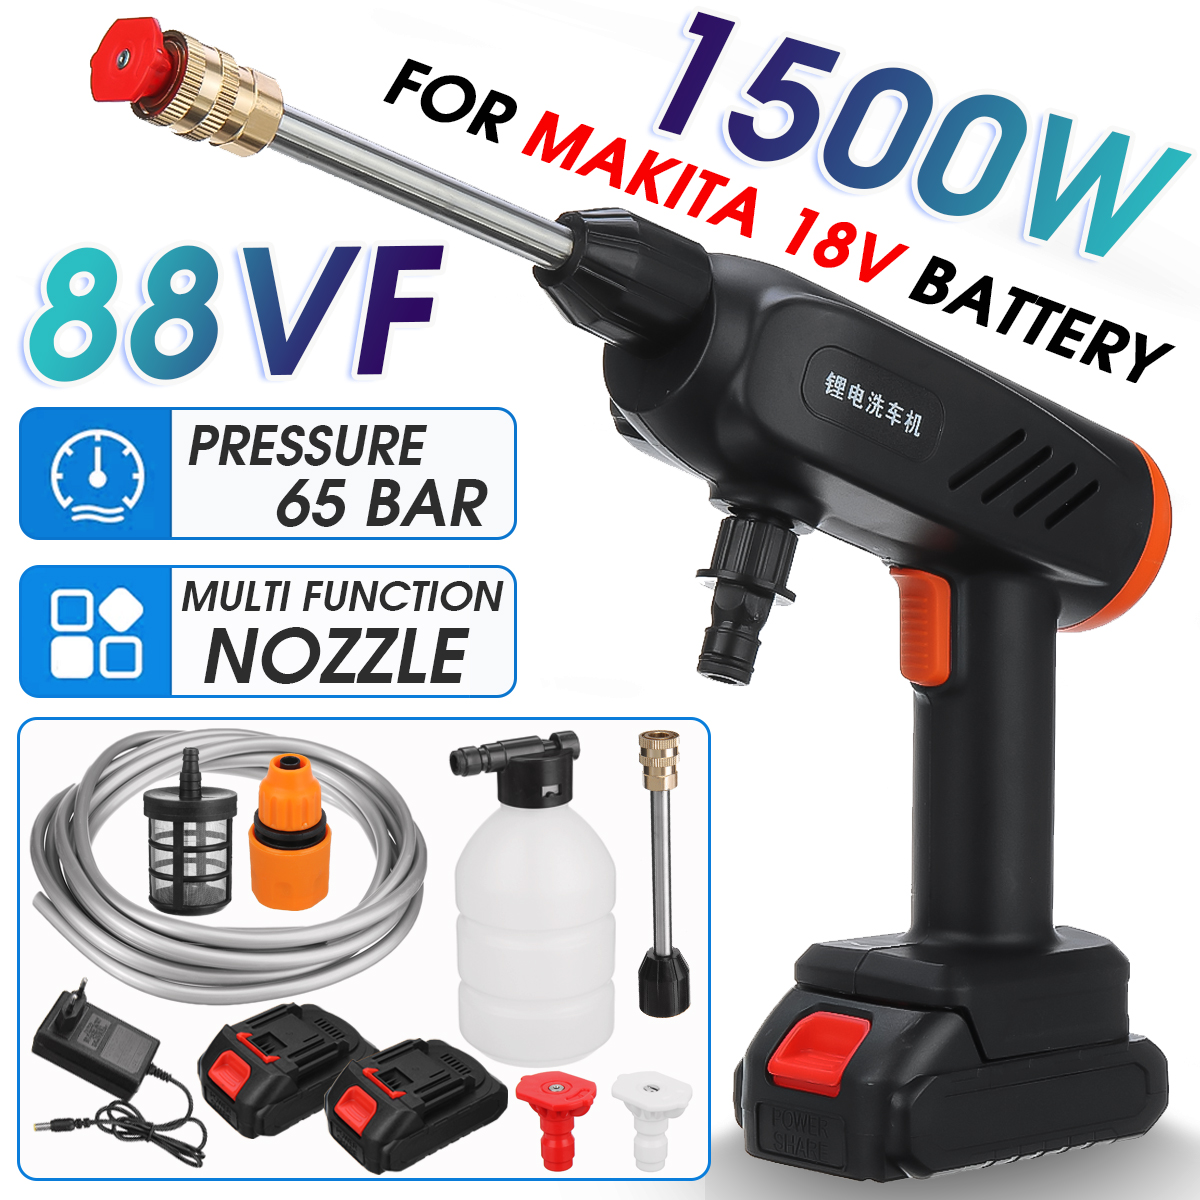 88VF-1500W-Electric-Spray-Guns-Cordless-Rechargeable-Water-Clener-Applicator-Home-Improvement-Craft--1919202-1